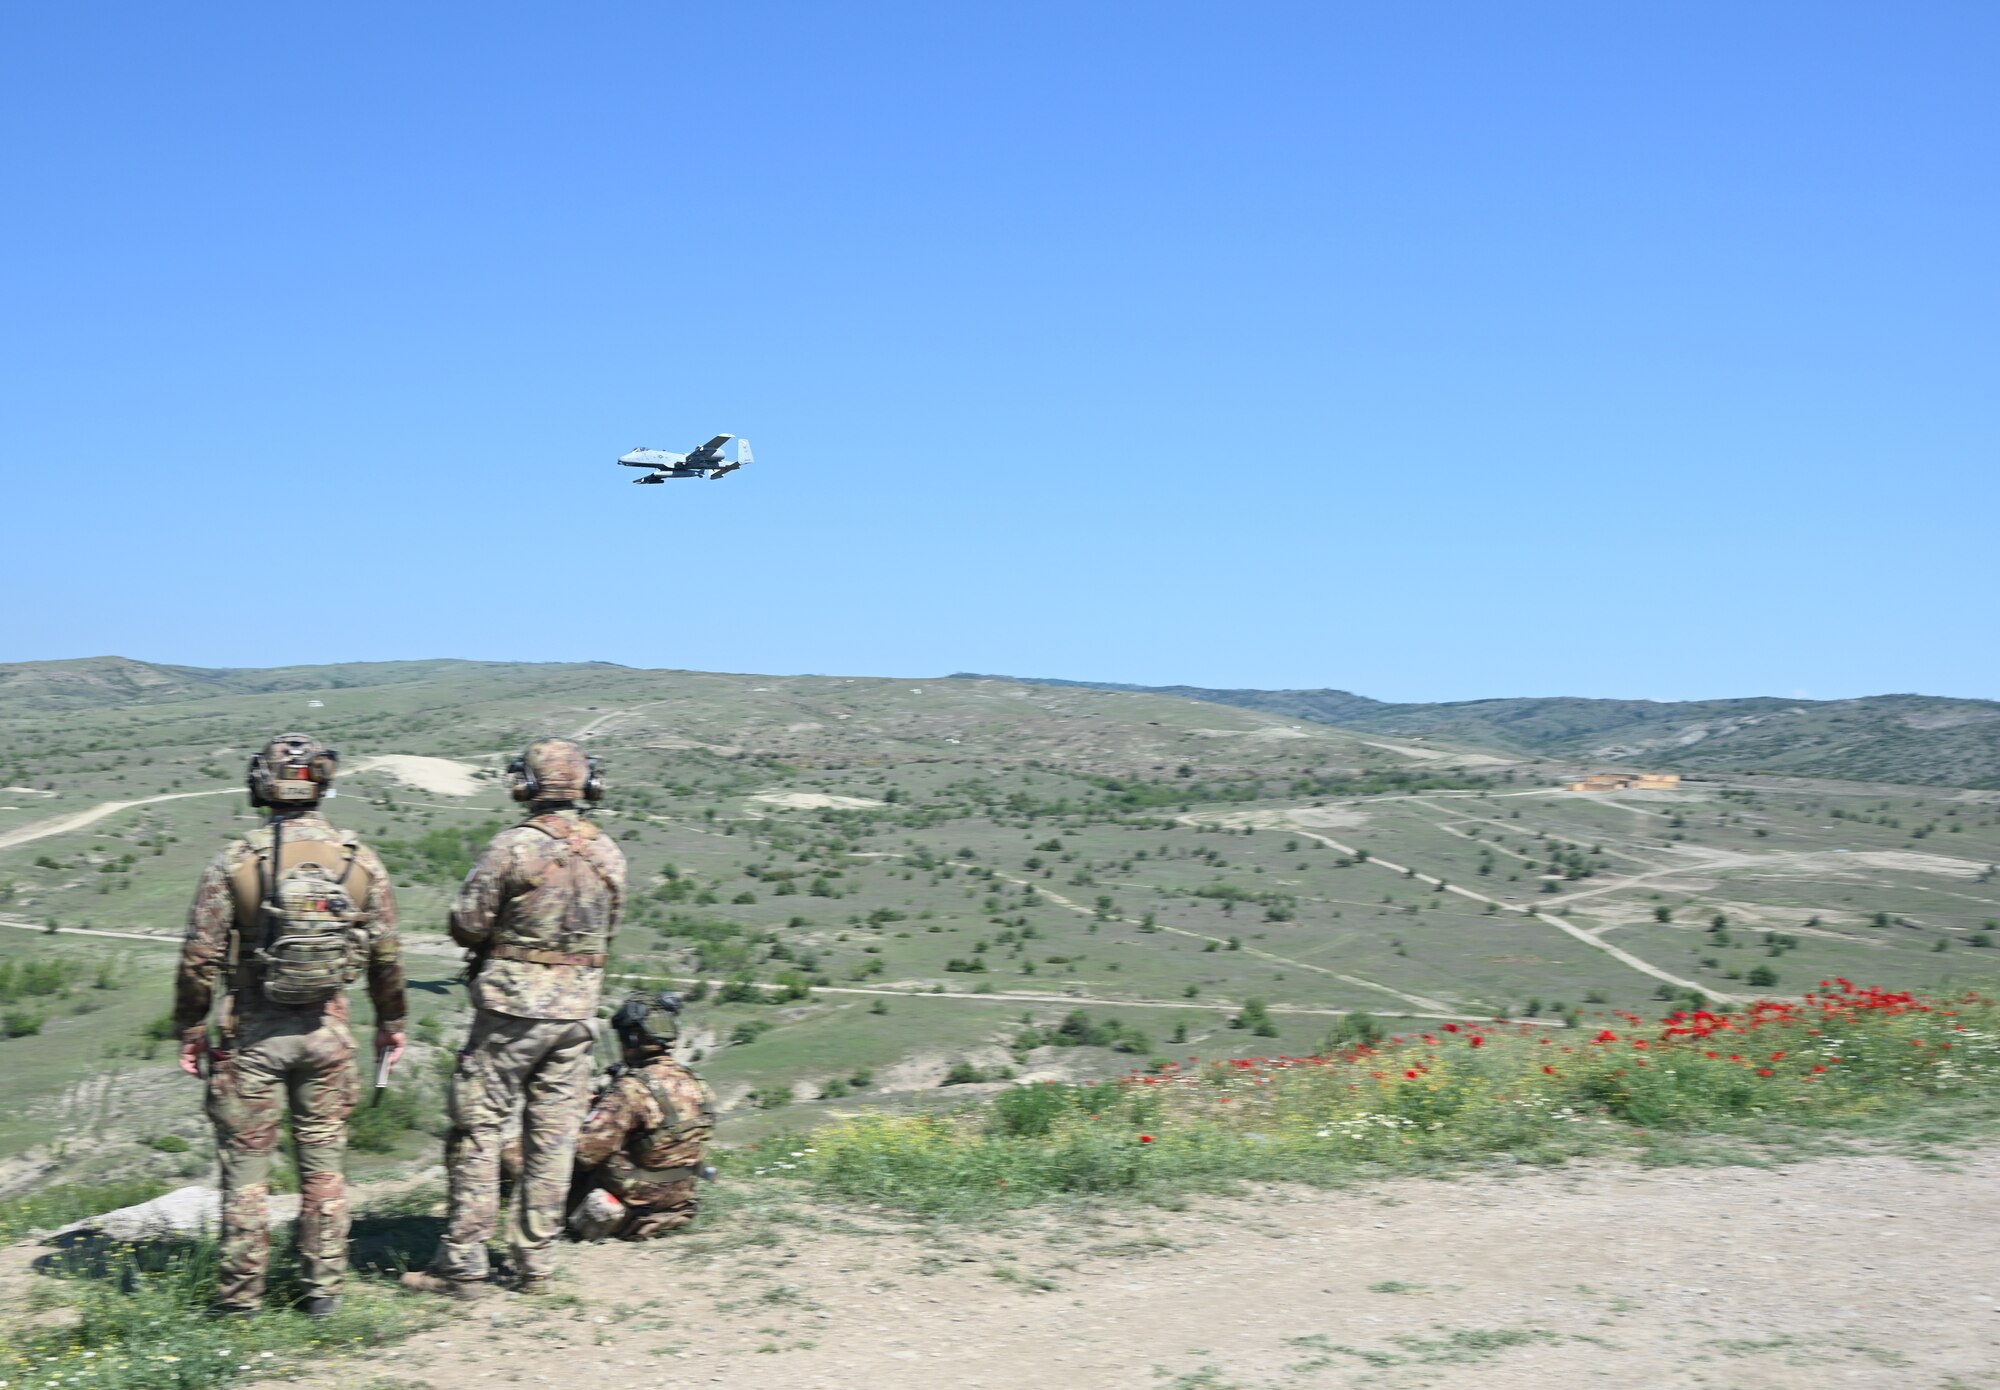 Three joint terminal attack controllers assigned to the Folgore Army Paratroopers of the Italian Army, observe an A-10C Thunderbolt II aircraft assigned to the 104th Fighter Squadron, Maryland Air National Guard, during a Swift Response 22 exercise at the Krivolak Military Training Center in Negotino, North Macedonia, May 11, 2022.